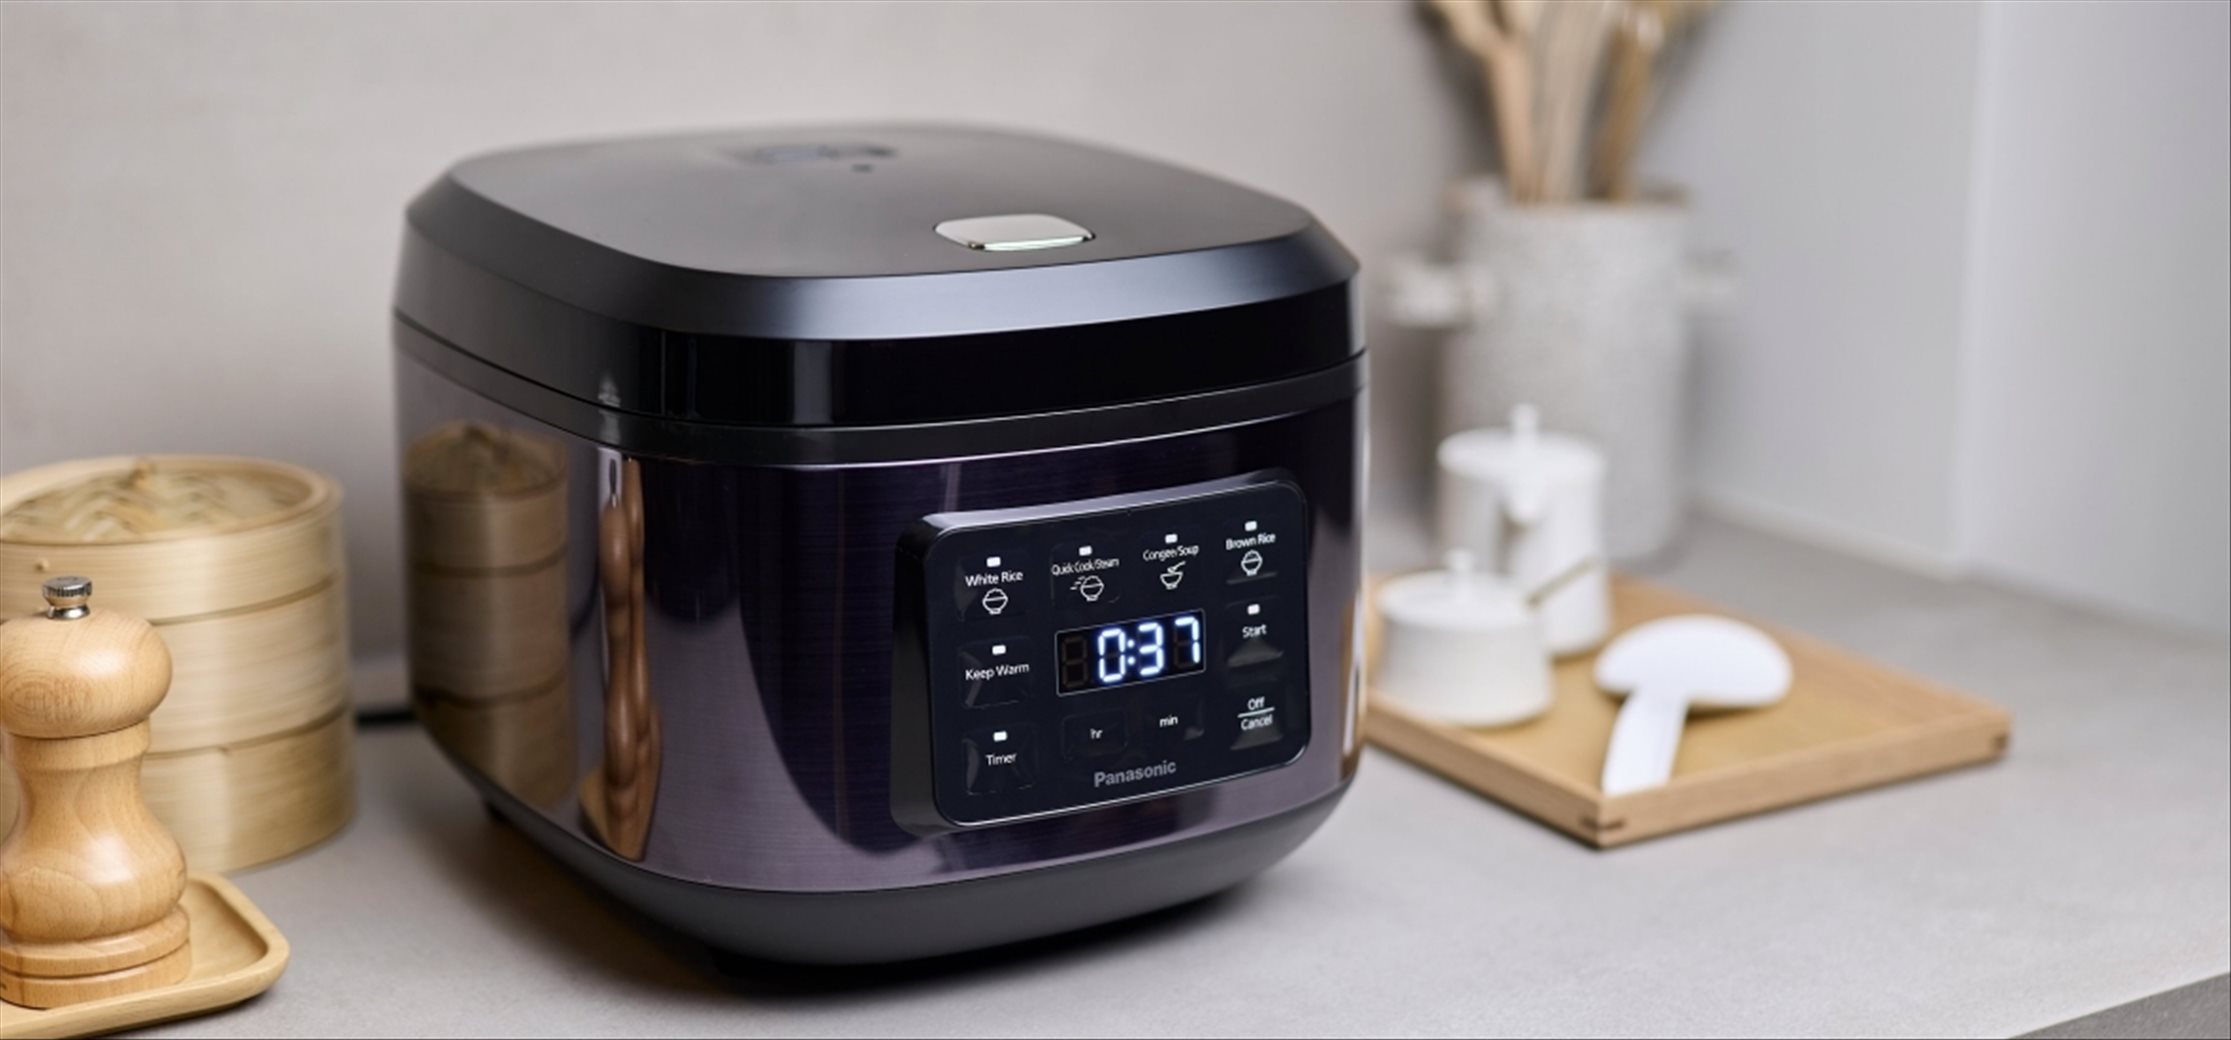 Panasonic’s new Rice Cookers: More than meets the eye